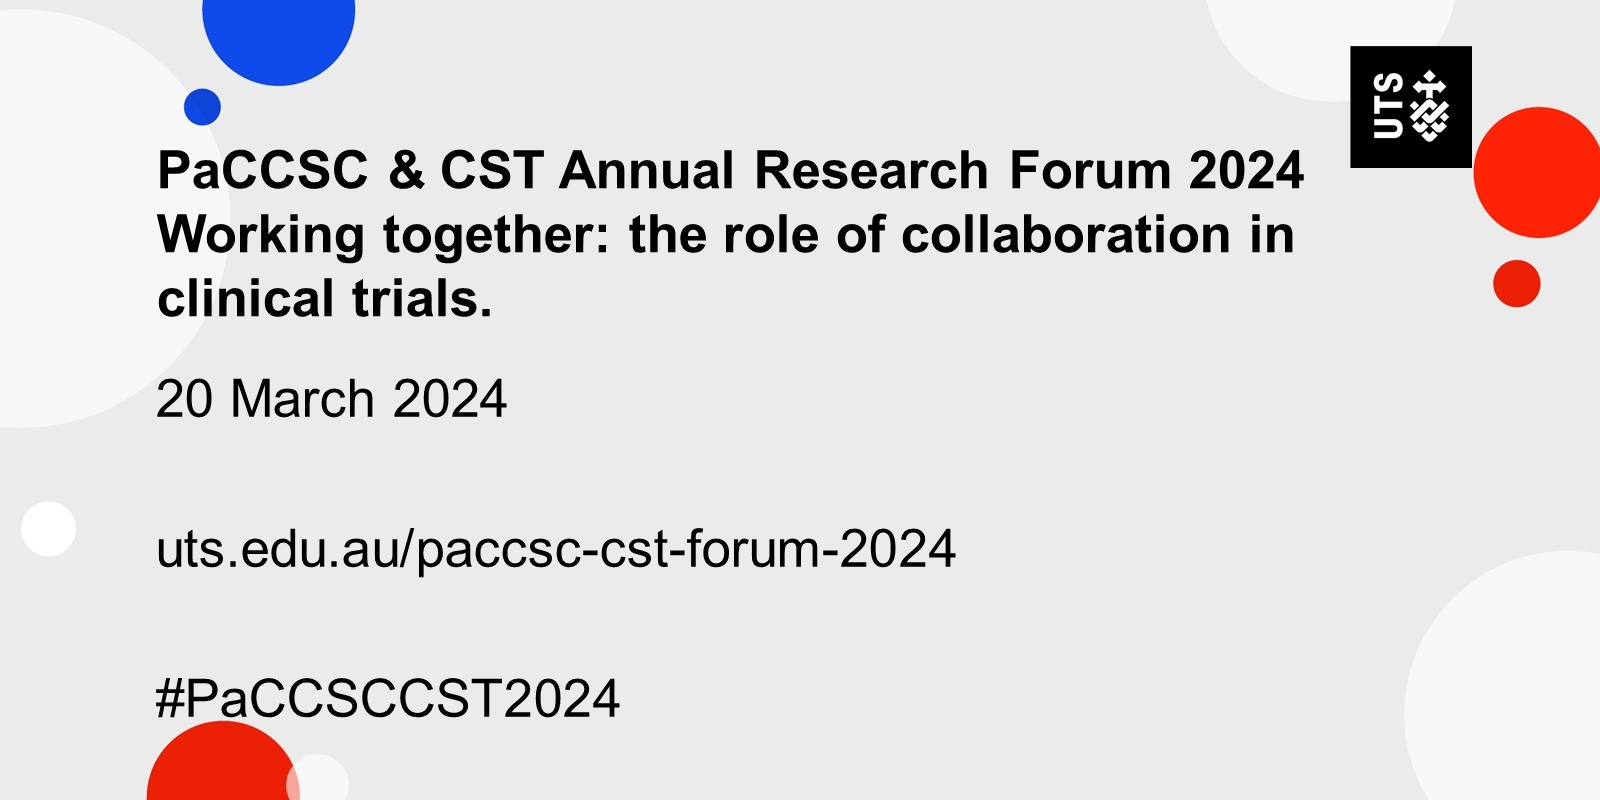 PaCCSC & CST Annual Research Forum 2024 Working together the role of